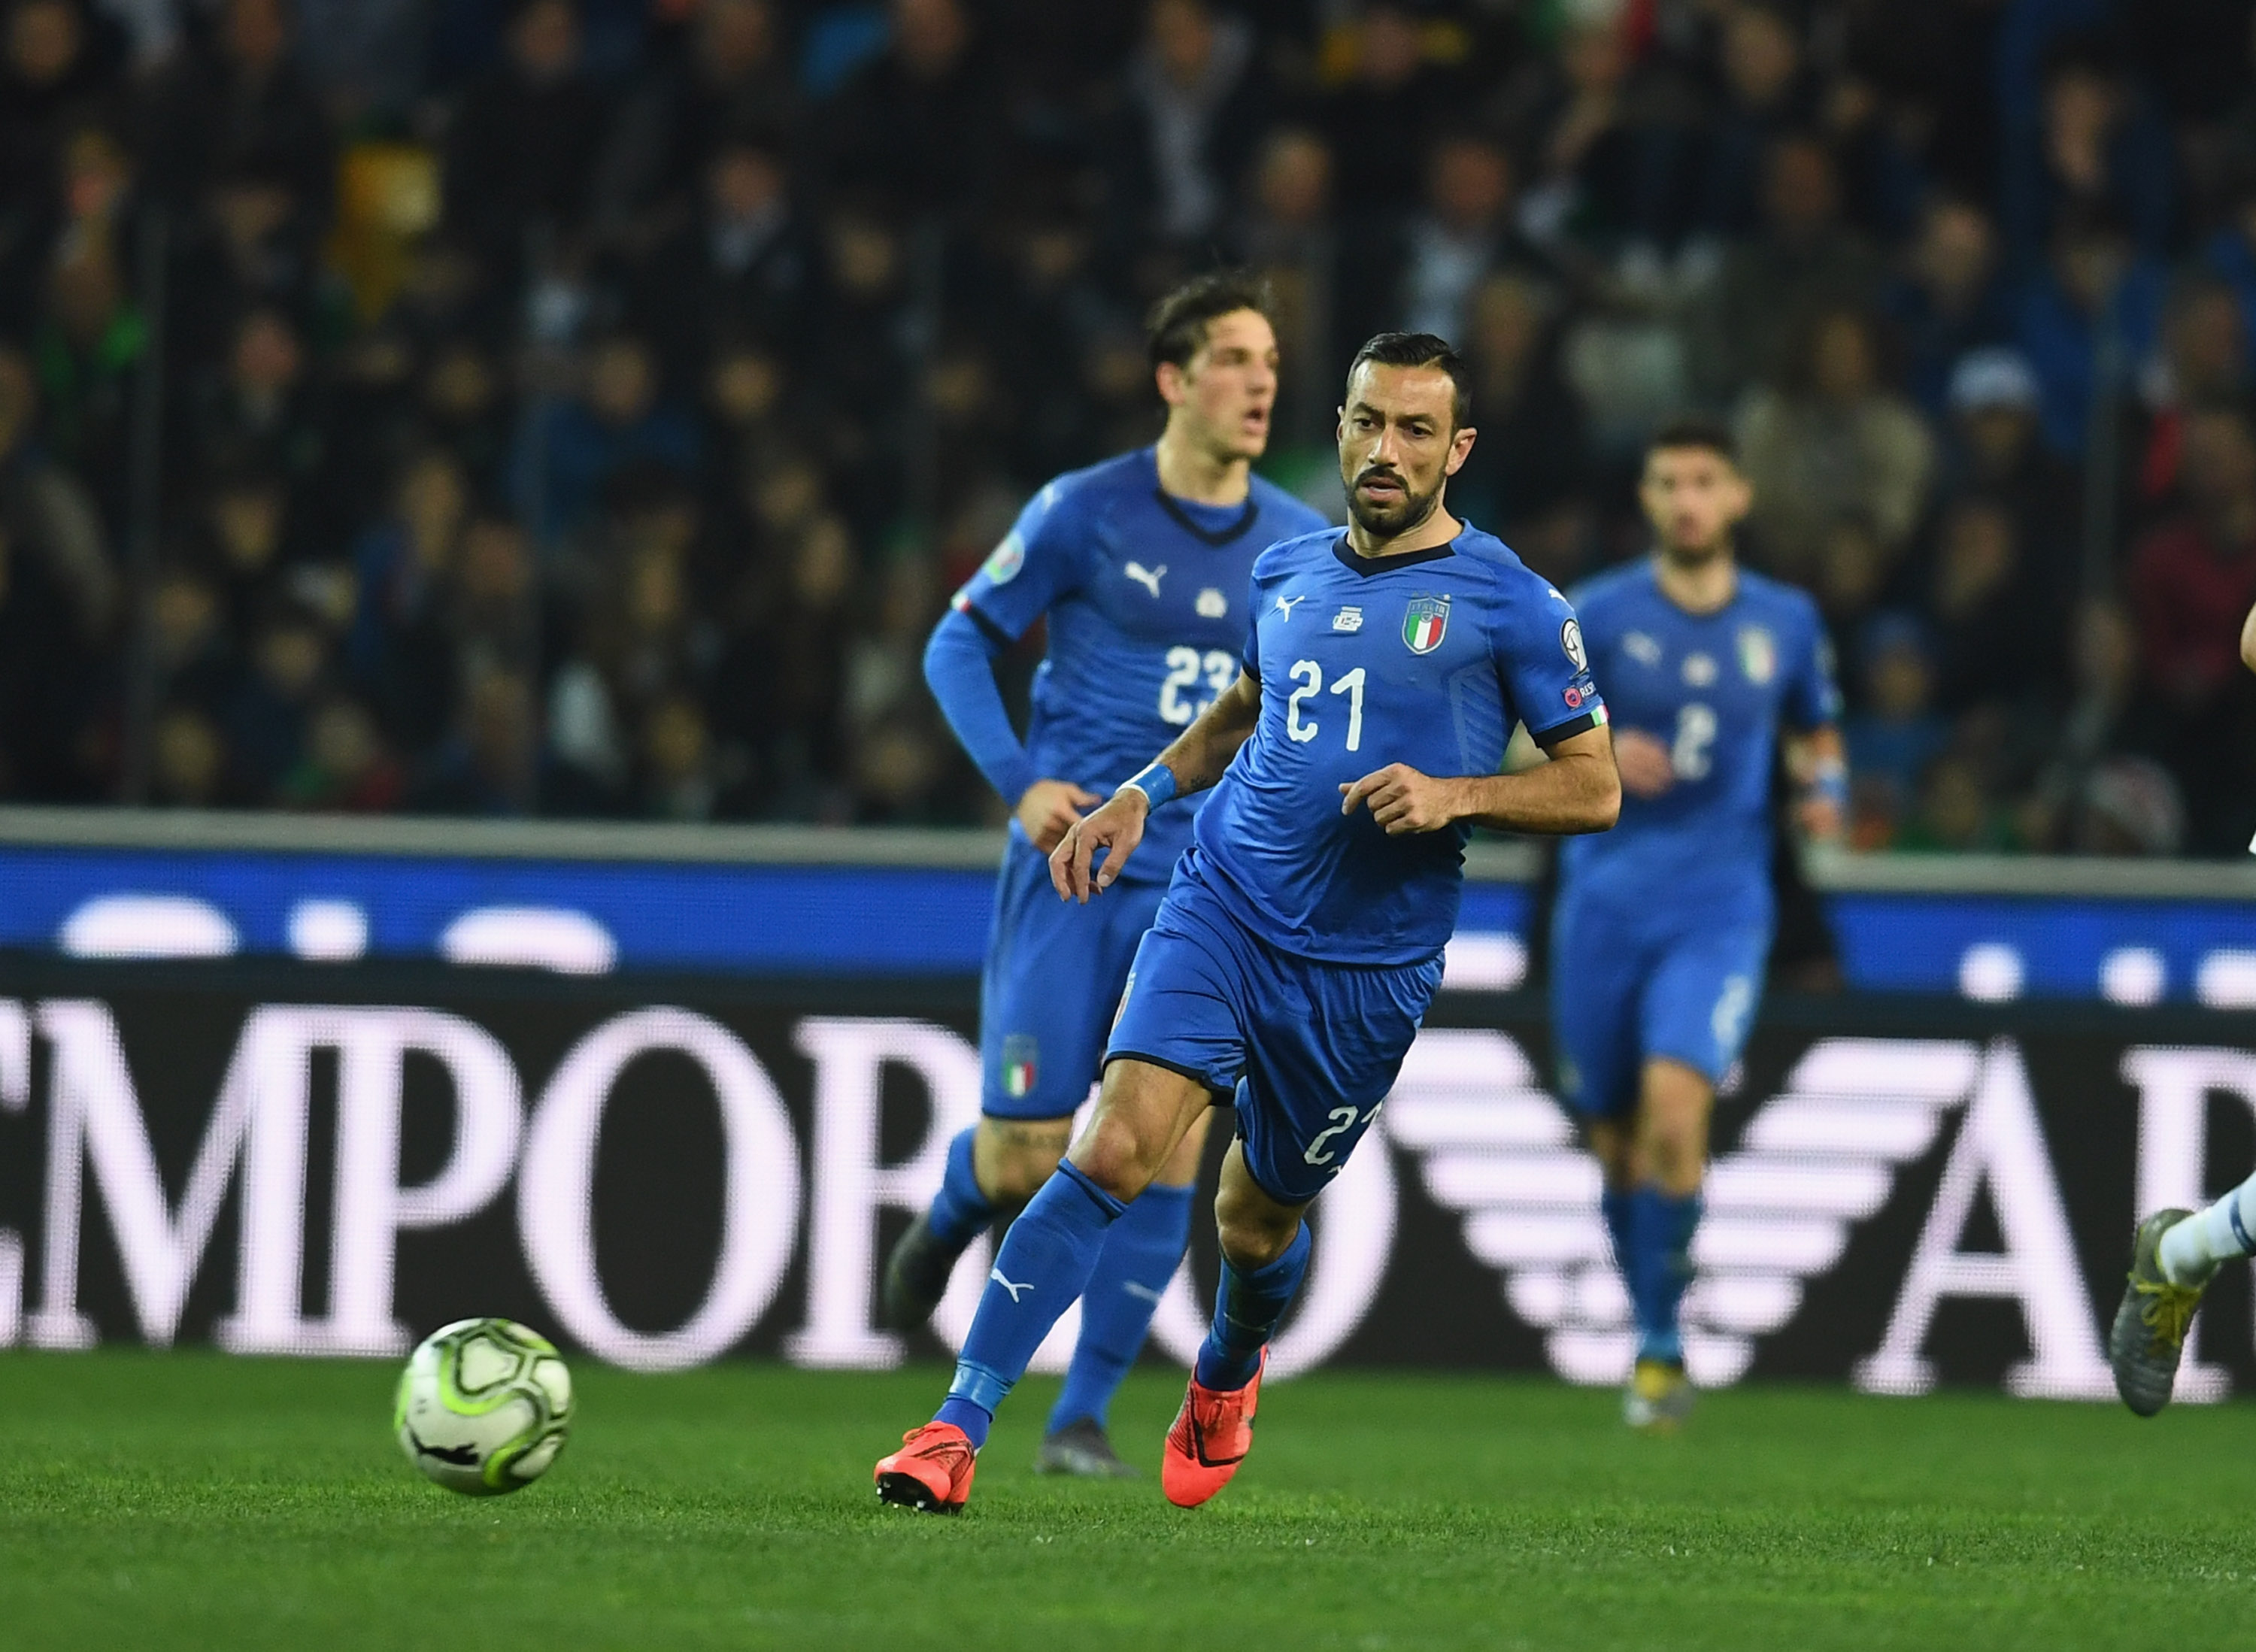 UDINE, ITALY - MARCH 23:  Fabio Quagliarella of Italy in action during the 2020 UEFA European Championships group J qualifying match between Italy and Finland at Stadio Friuli on March 23, 2019 in Udine, Italy.  (Photo by Claudio Villa/Getty Images)